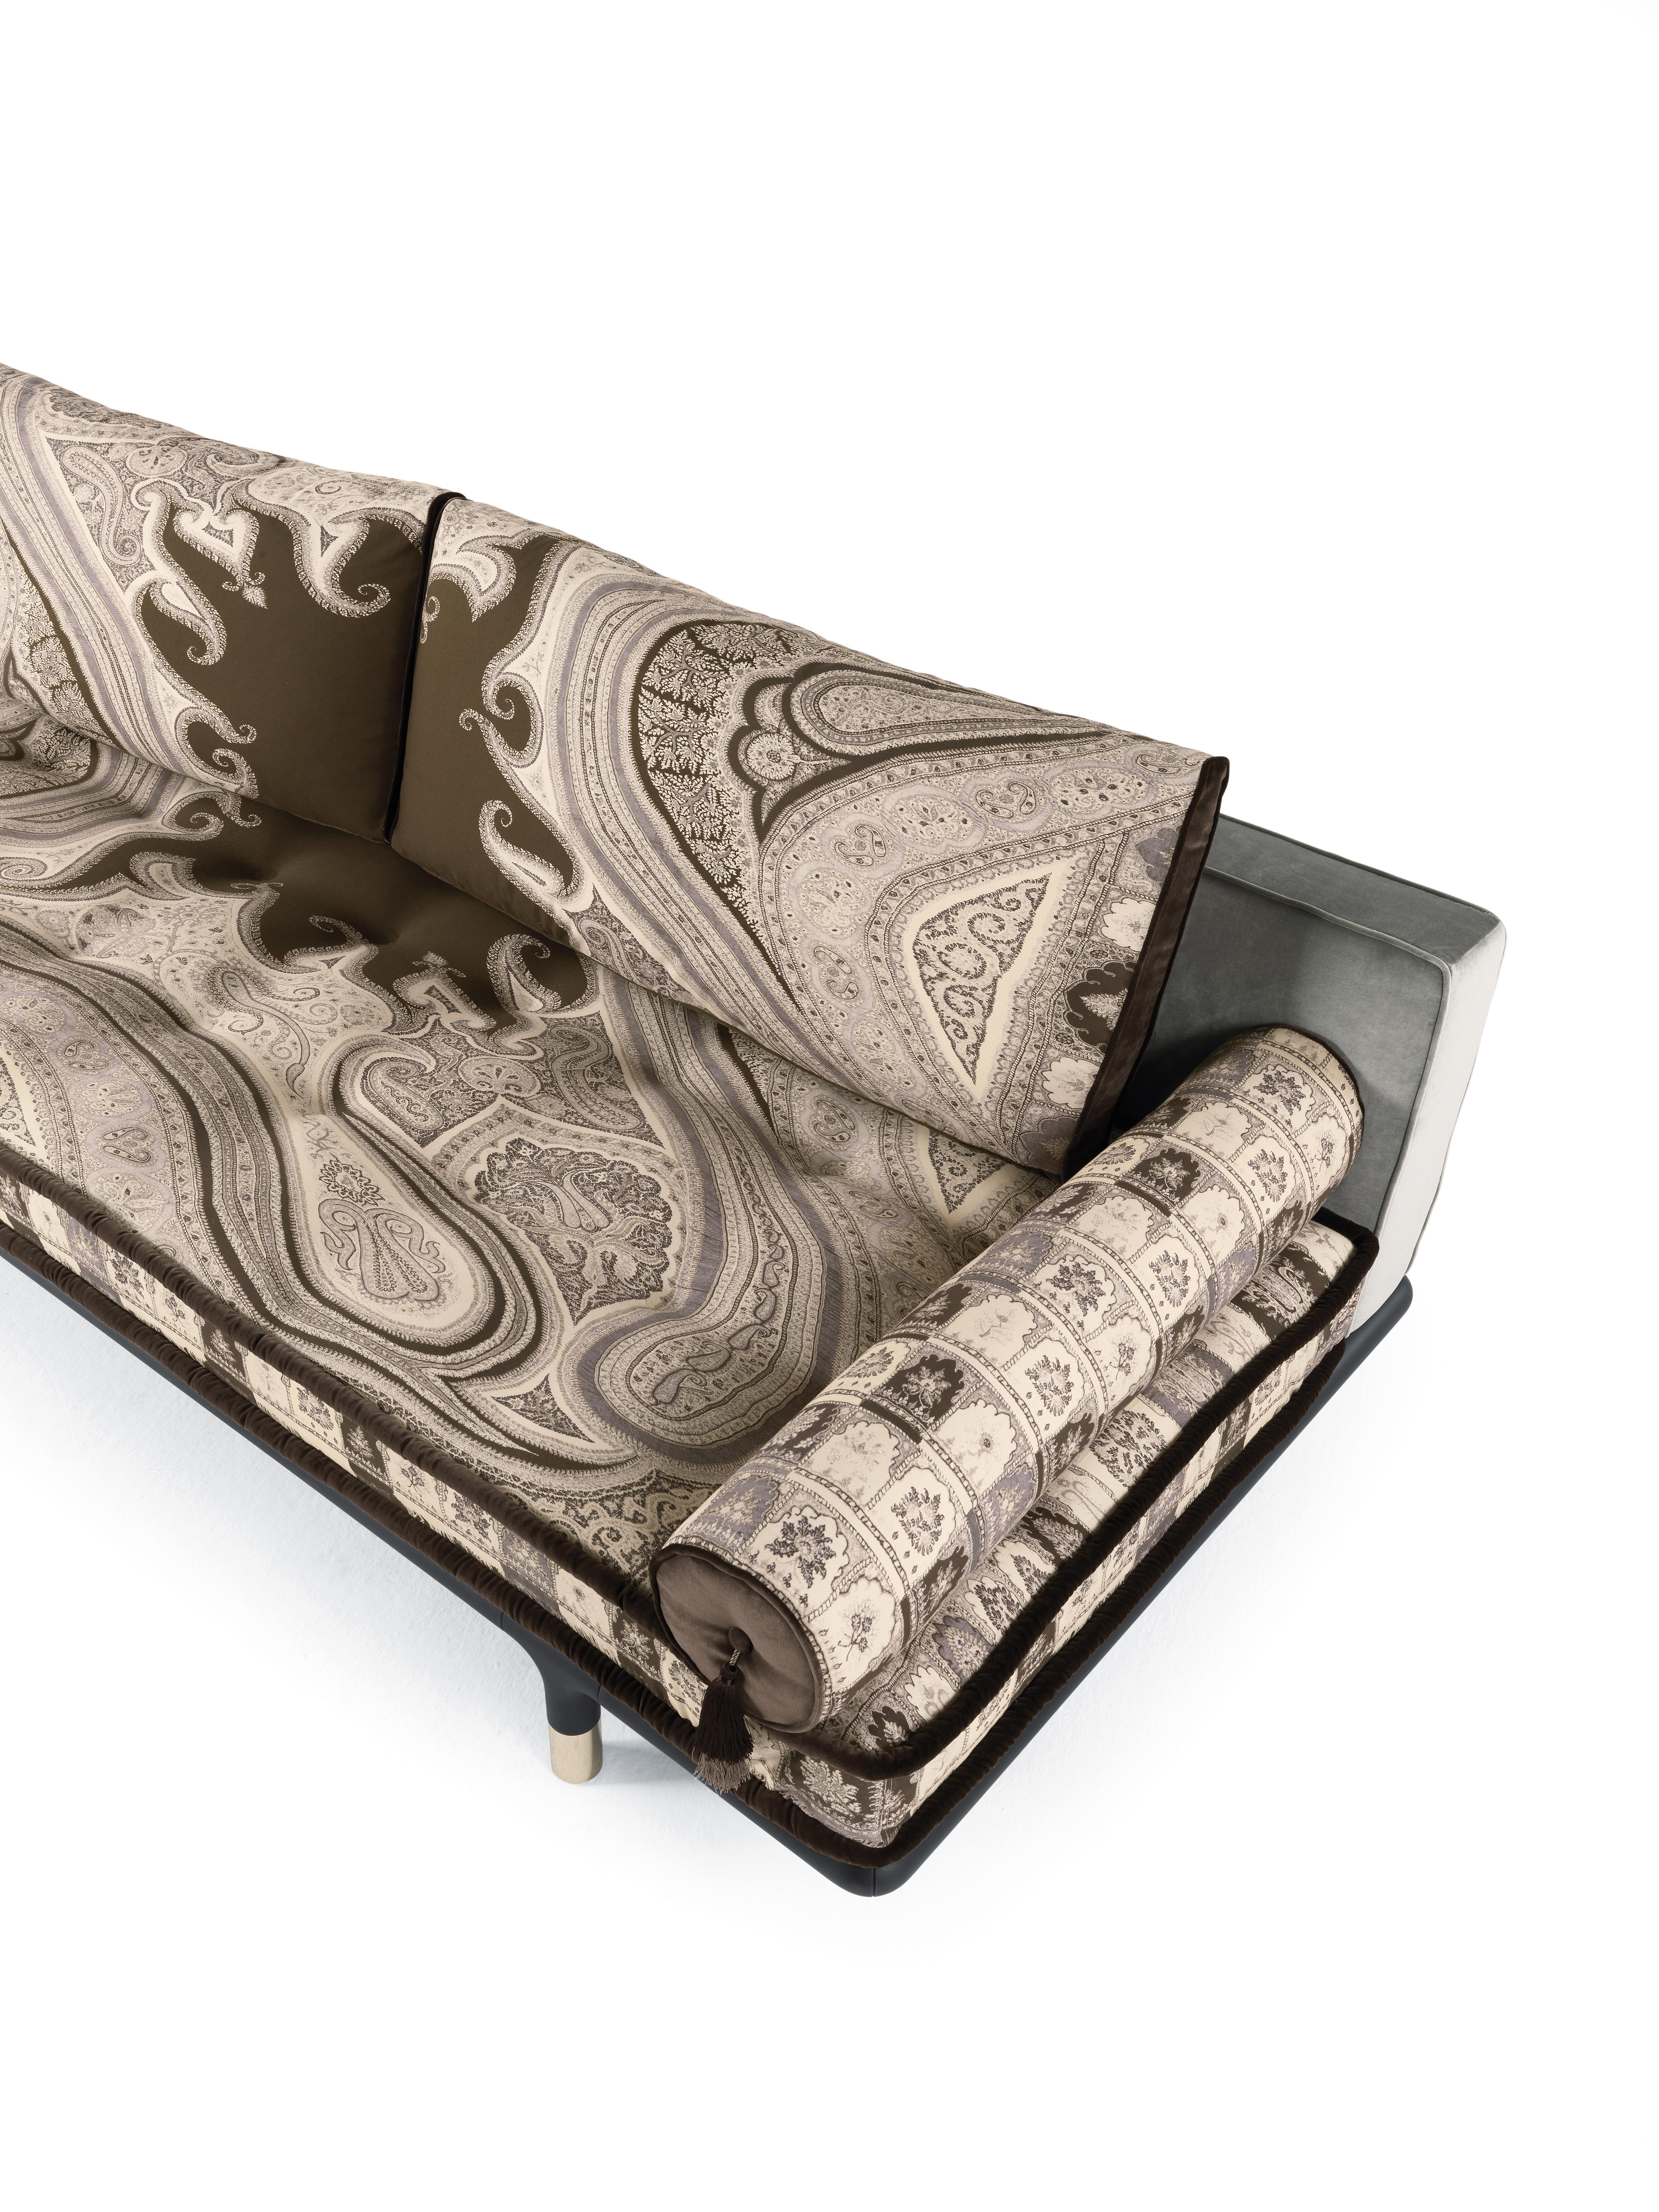 Modern 21st Century Woodstock Mountain Sofa in Fabric by Etro Home Interiors For Sale